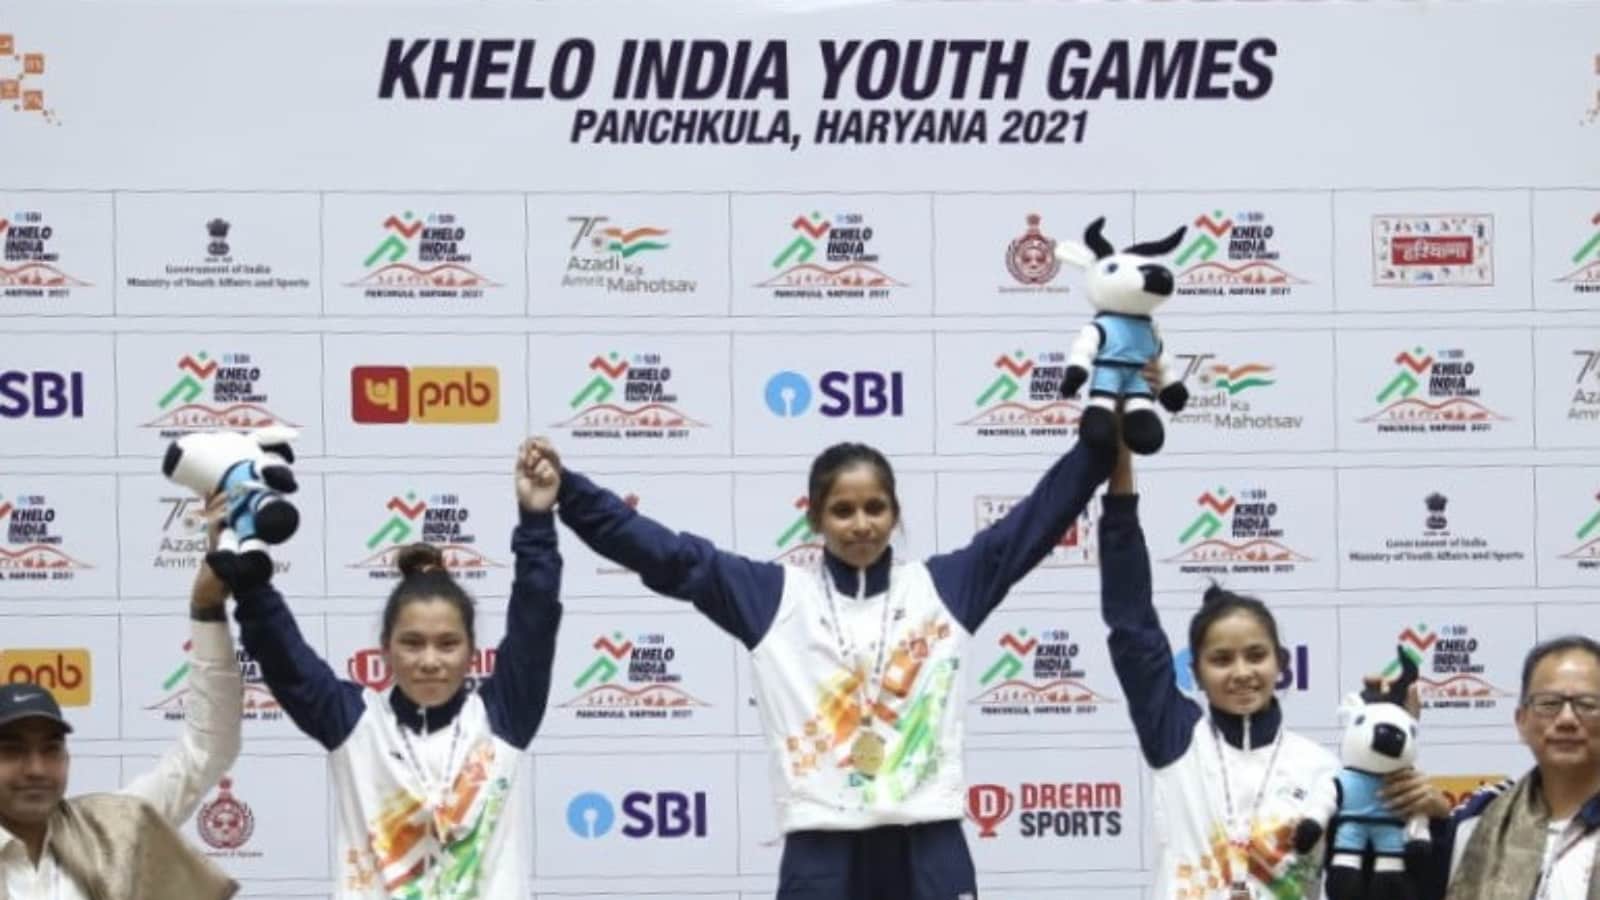 Khelo India Youth Games 2021: Maharashtra Lead with 9 Gold, Haryana in Close Second